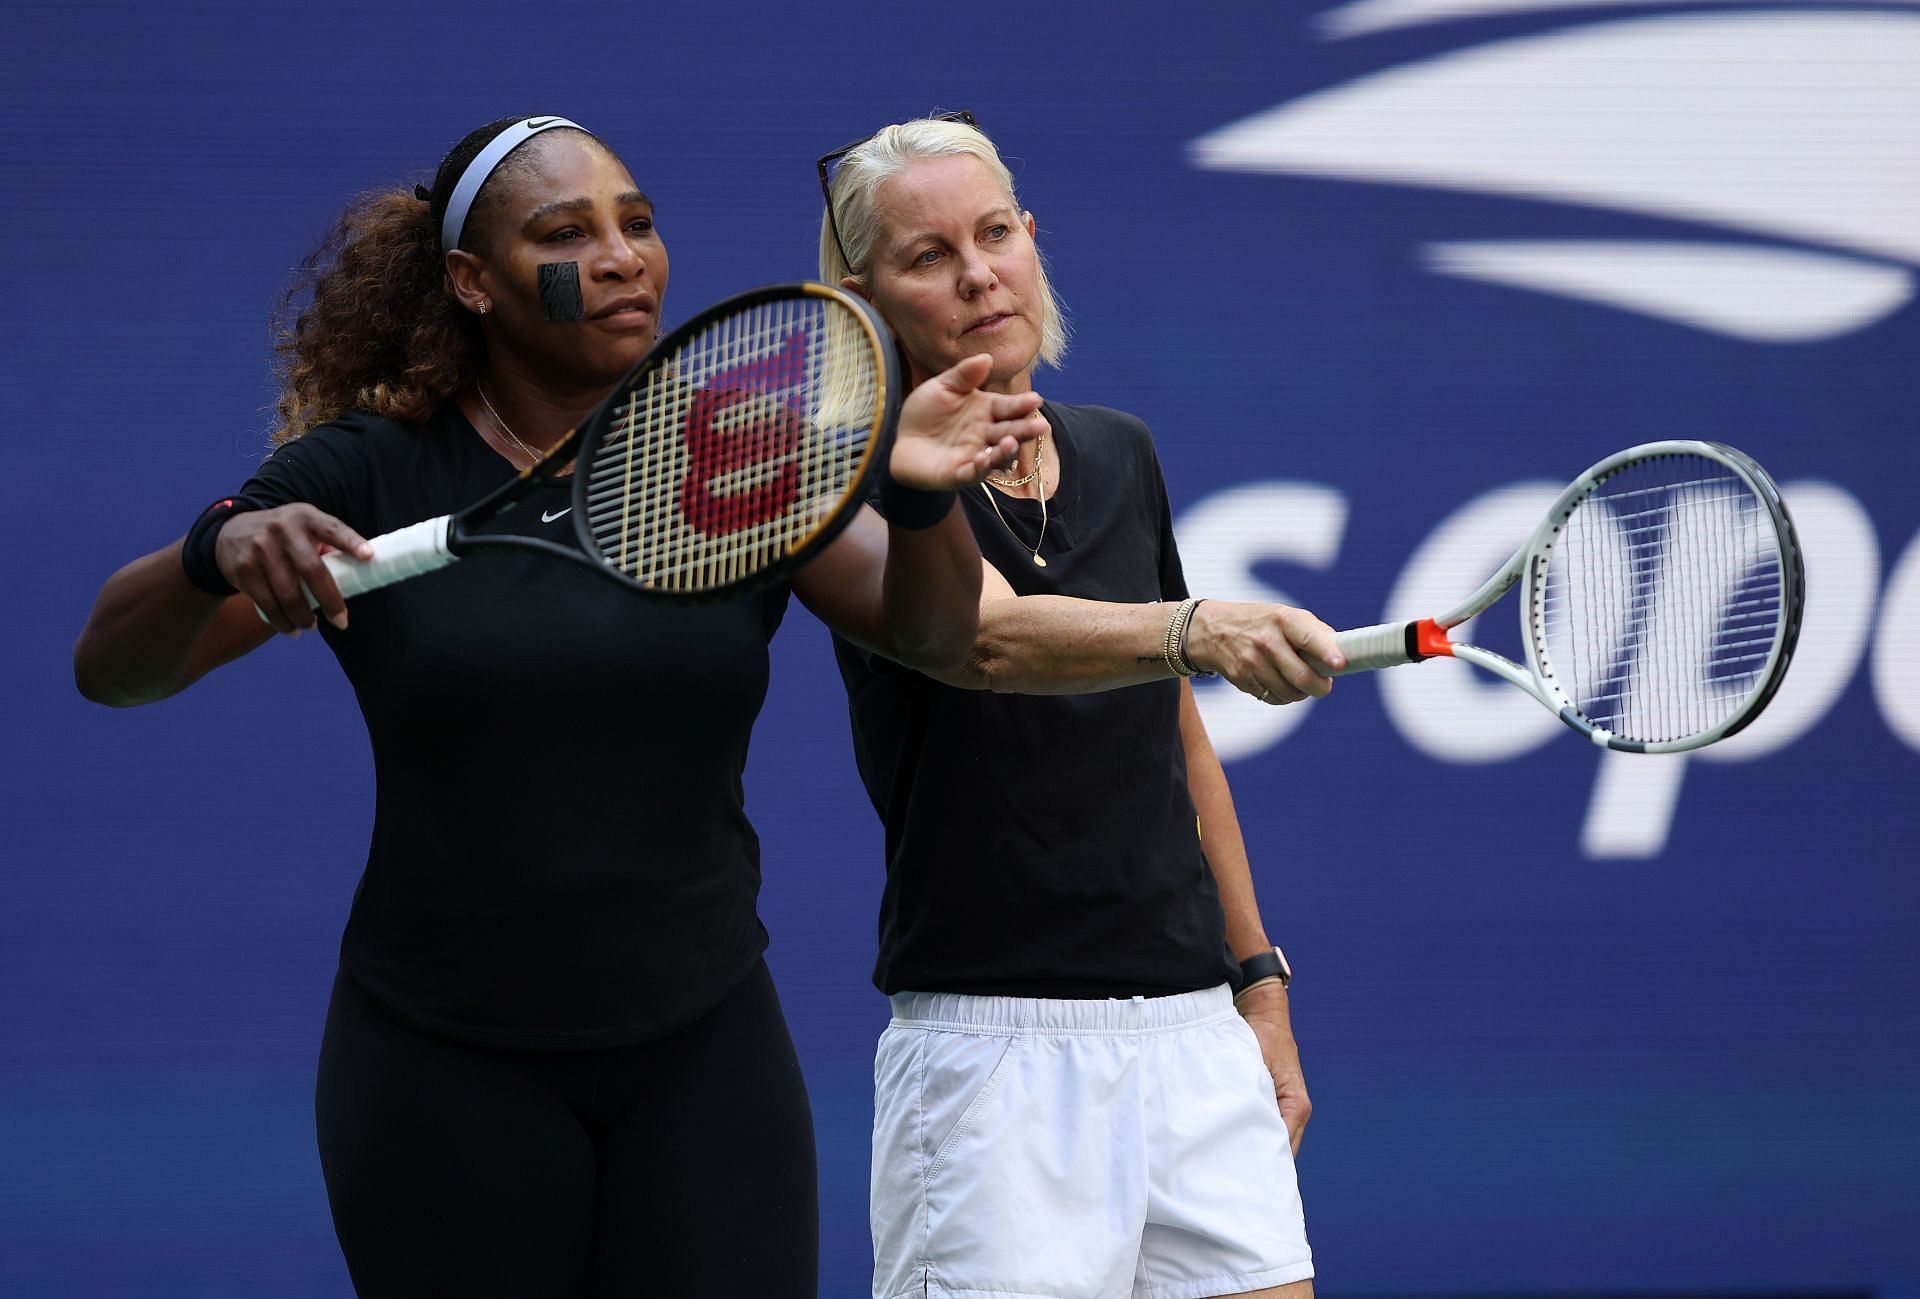 Rennae Stubbs and Serena Williams at the 2022 US Open